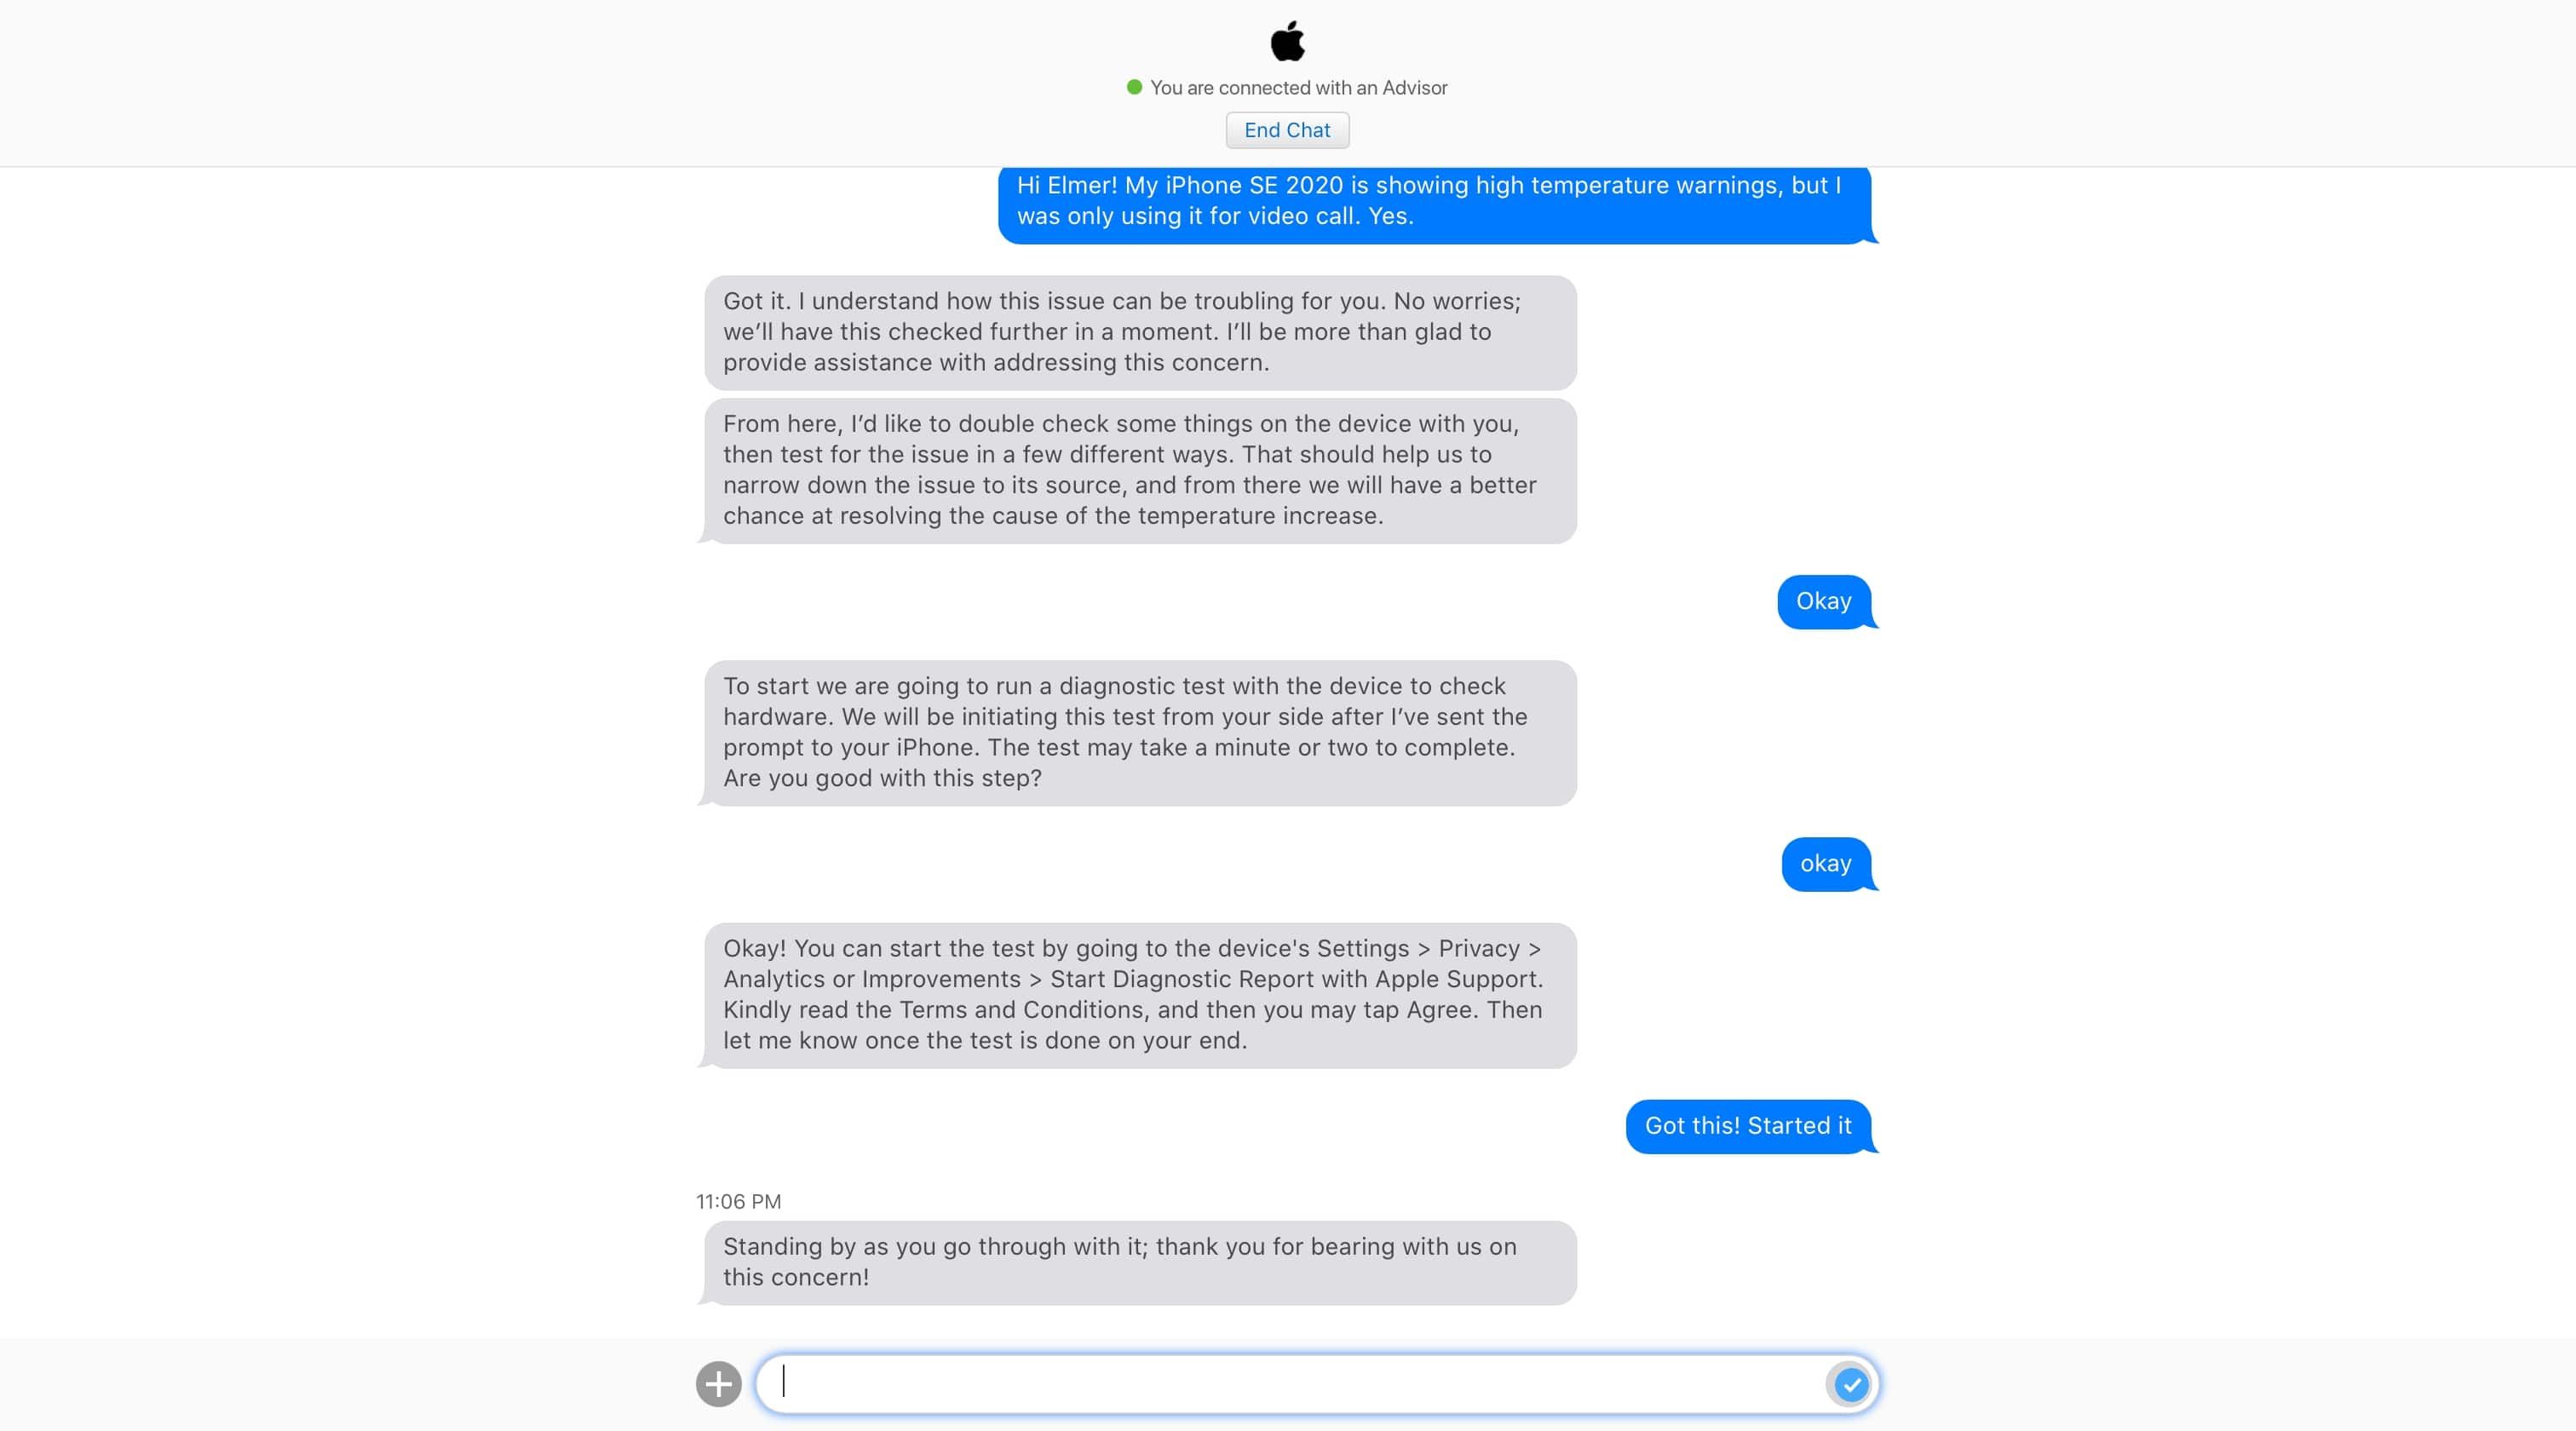 Apple Support conversation before requesting for a remote diagnostic report